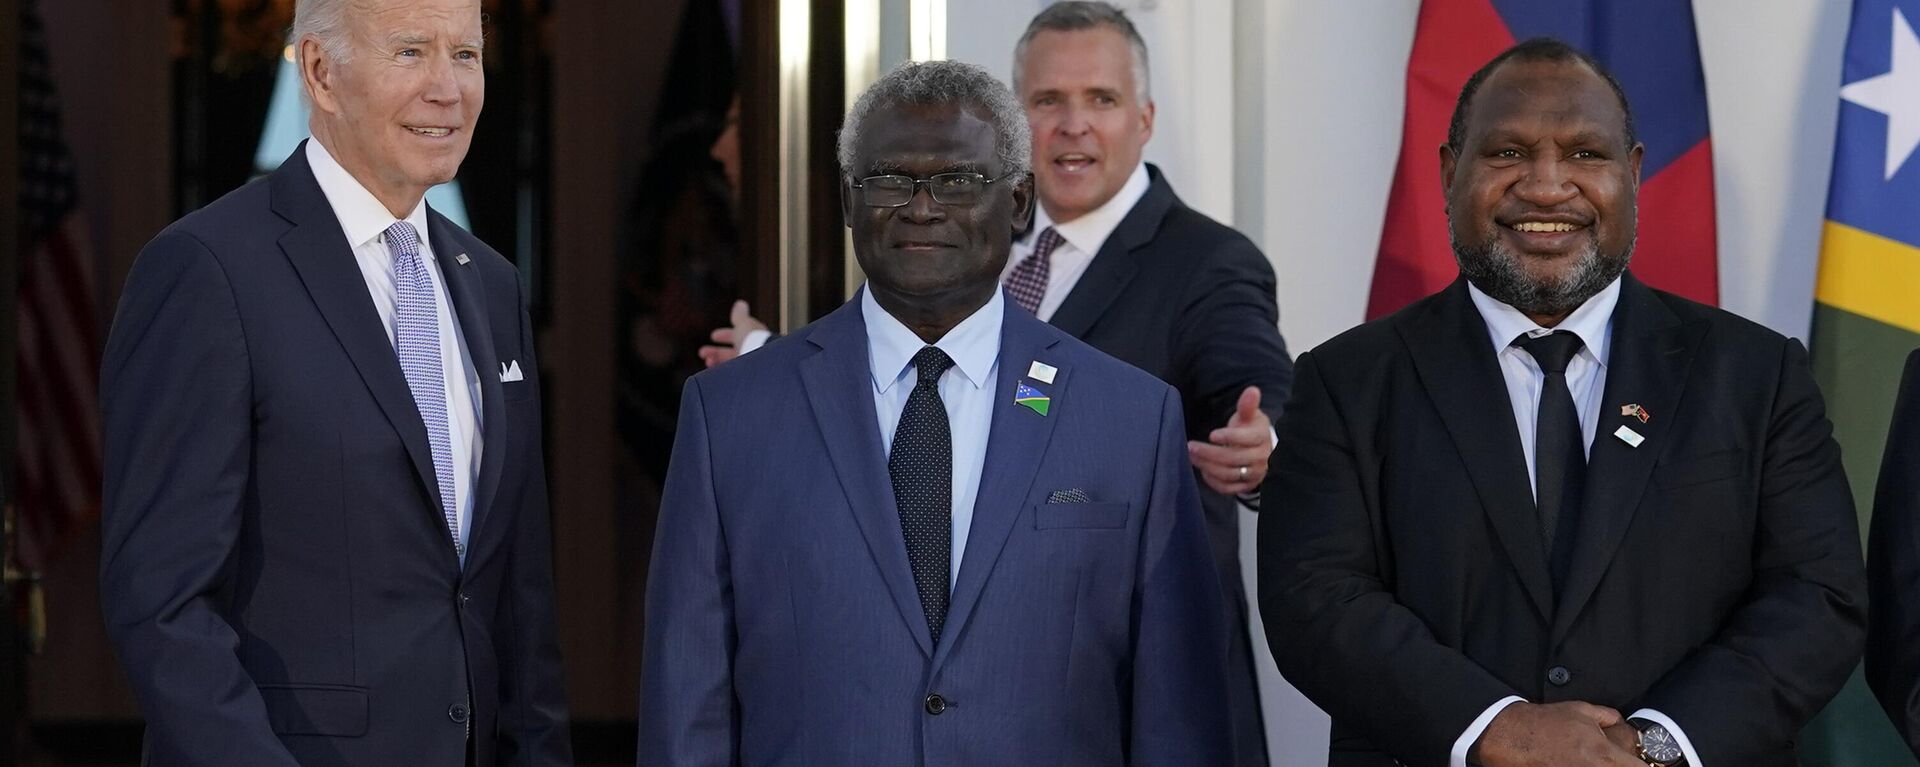 President Joe Biden poses for photos with Pacific Island leaders including Solomon Islands Prime Minister Manasseh Sogavare, center, and Papua New Guinea Prime Minister James Marape on the North Portico of the White House in Washington, Sept. 29, 2022. - Sputnik India, 1920, 17.05.2023